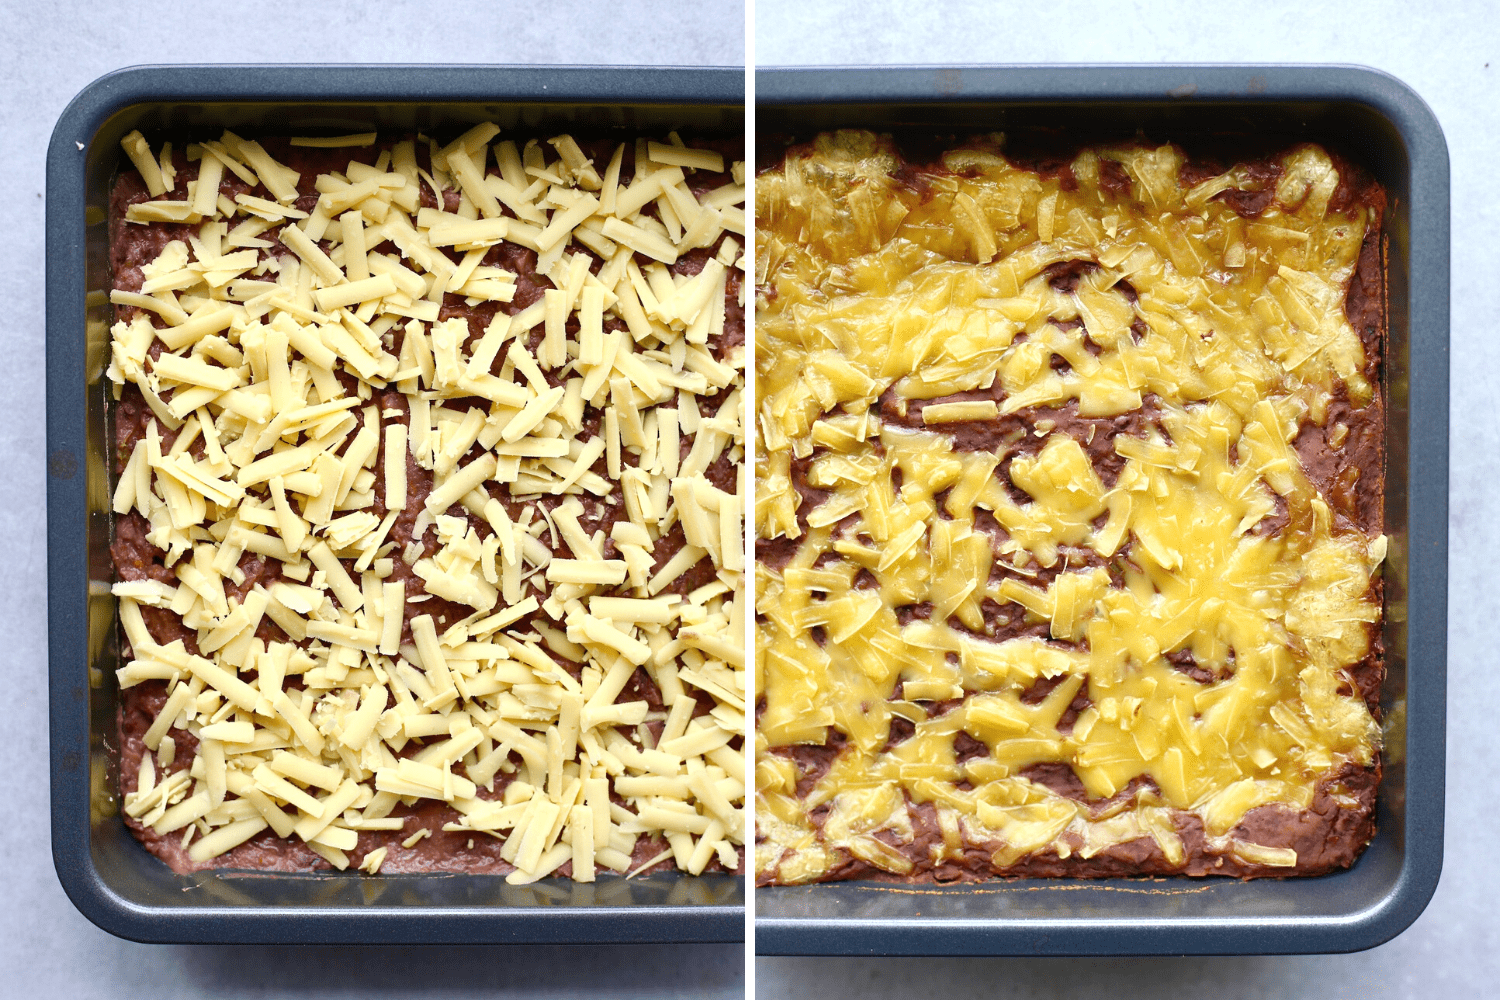 Cheesy vegan black bean dip before and after baking